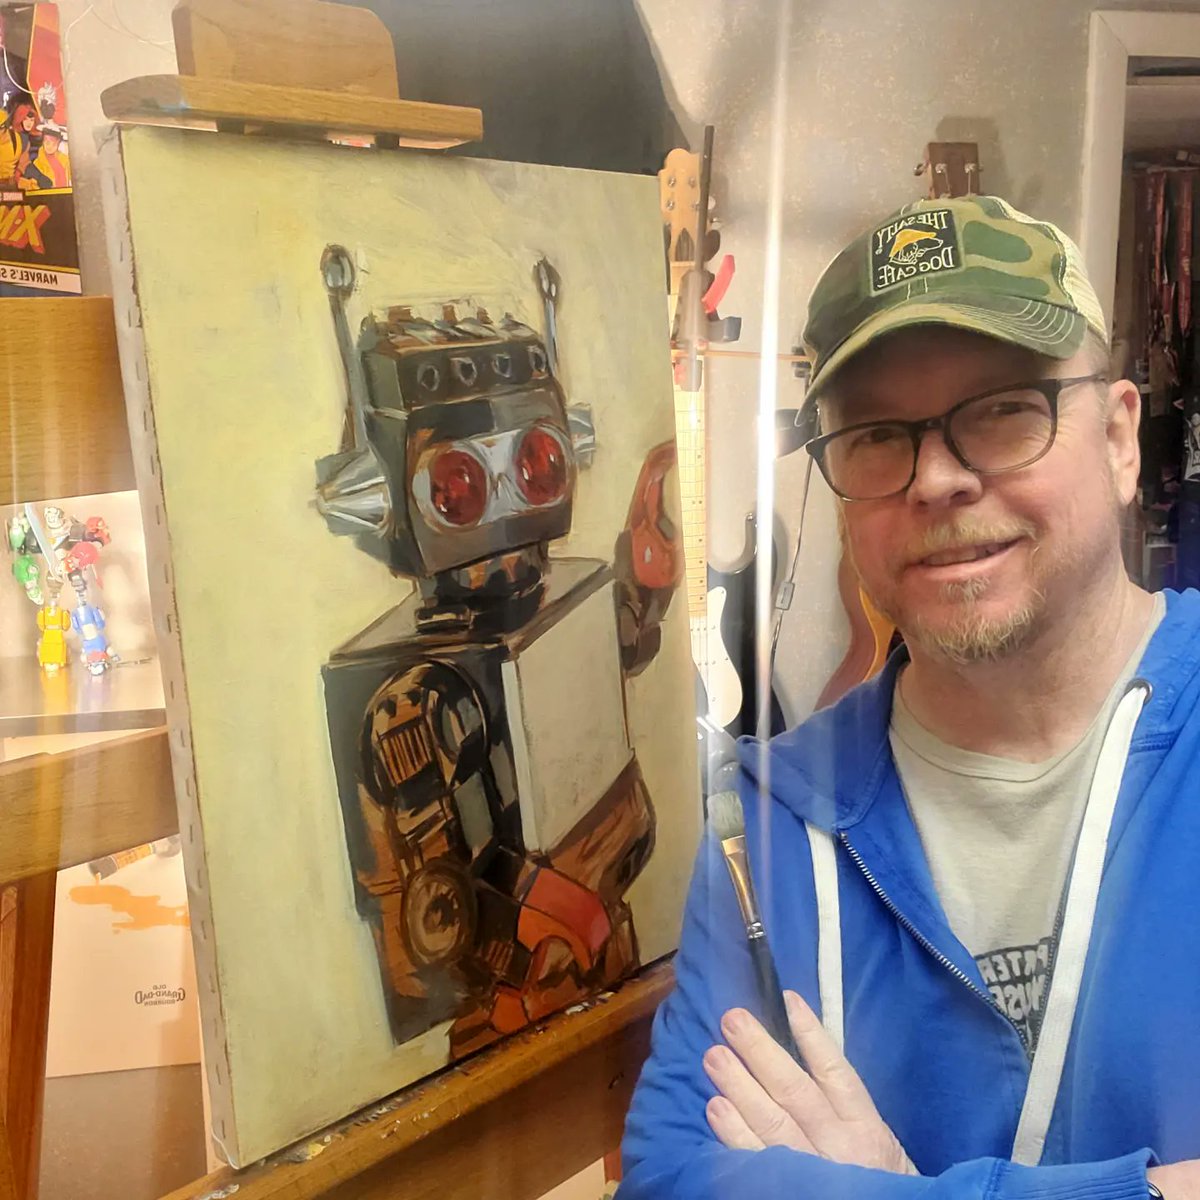 What does this painting make you feel?

For me, this series of paintings featuring robot toys evokes a strong sense of nostalgia.

This brings back memories of my own youth and the toys I had—or wished I had.

#robot #toycollector #oilpainting #oiloncanvas